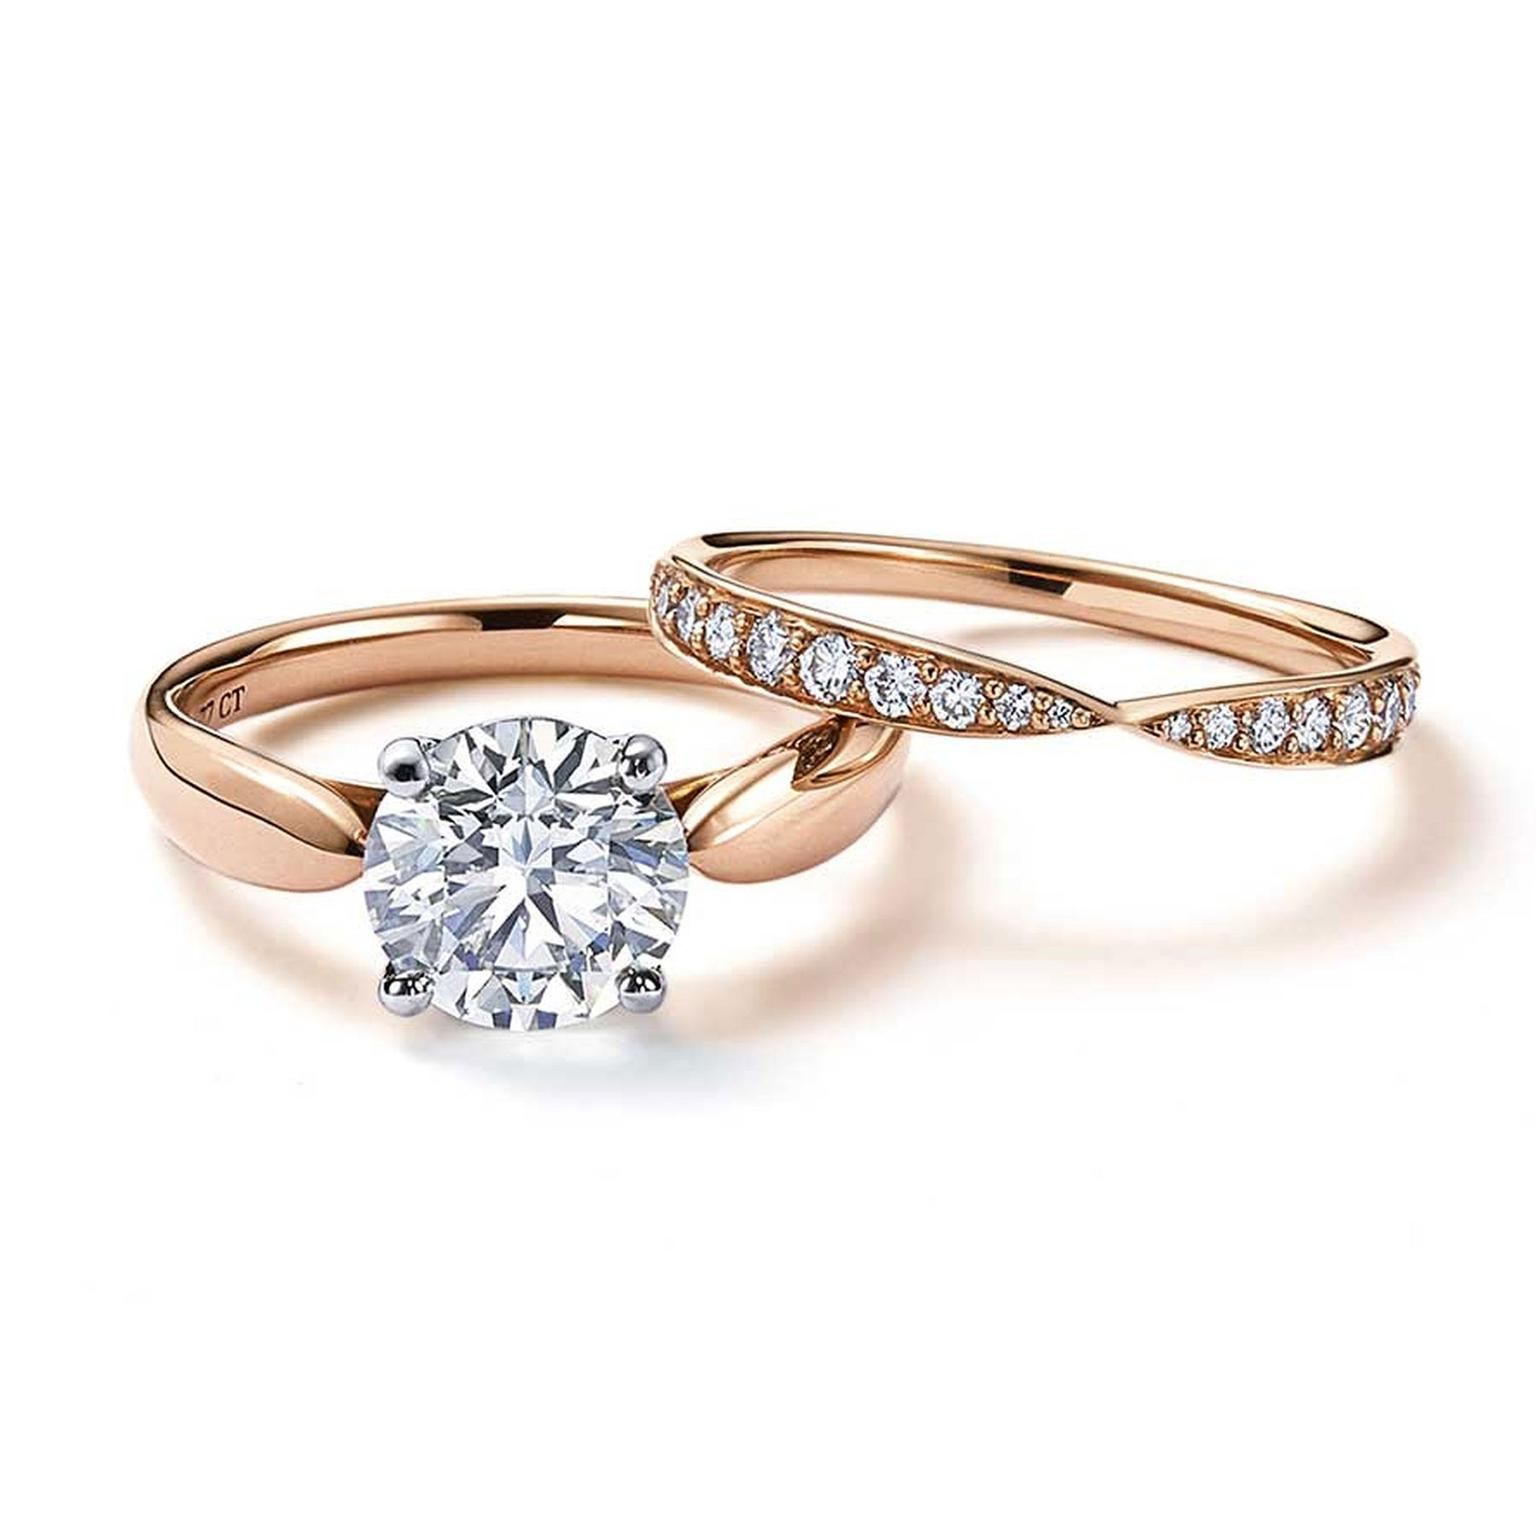 Wedding Rings Tiffany
 Tiffany has captured our hearts with its rose gold